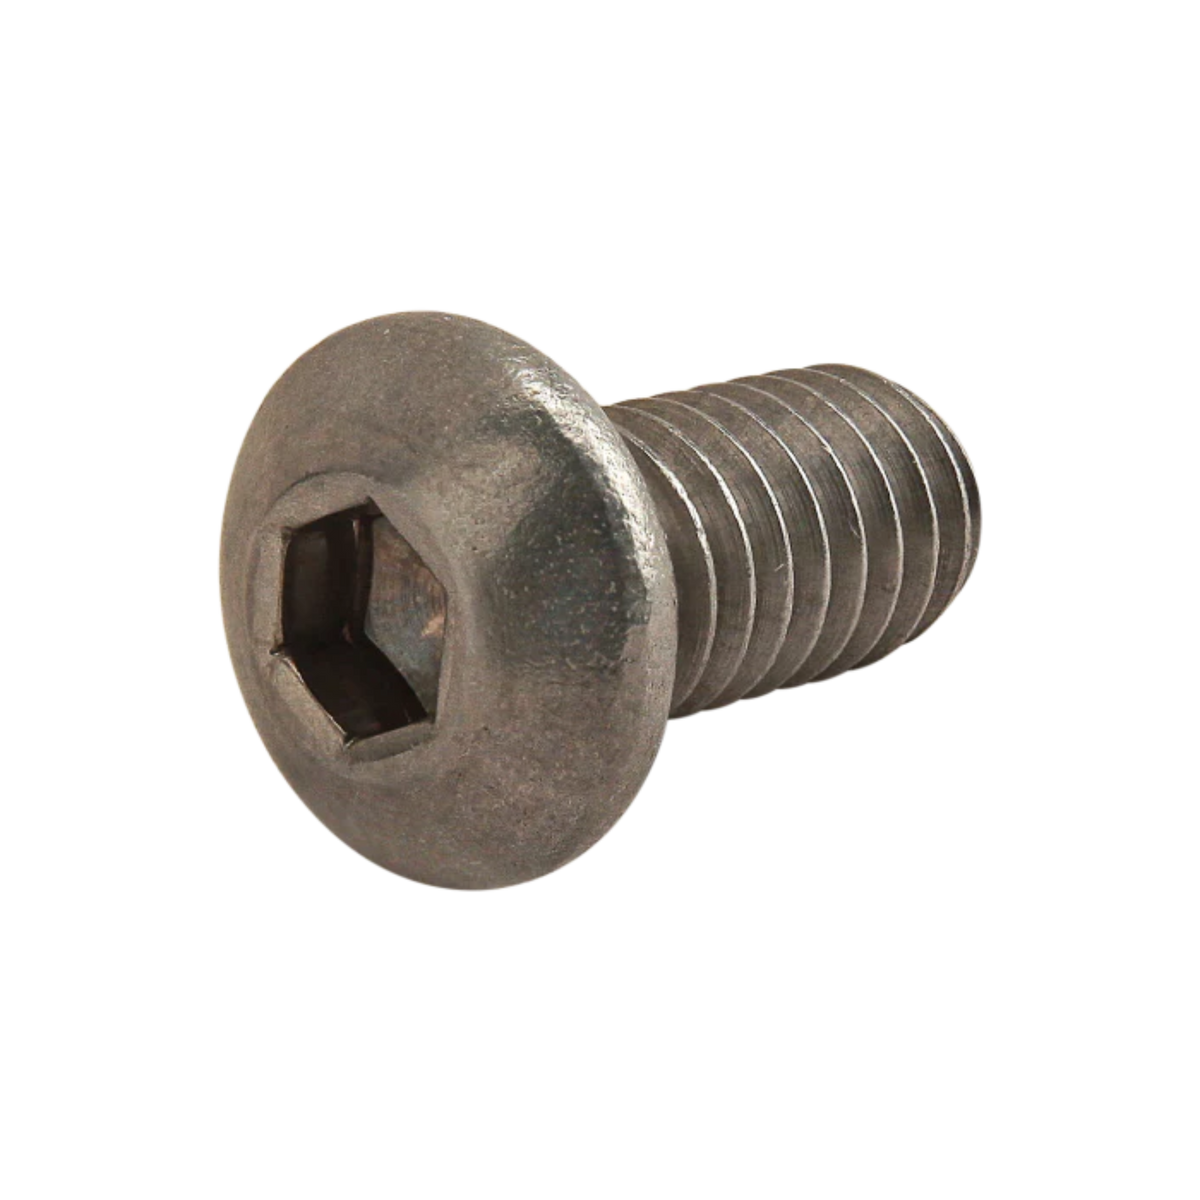 side view of a metal button head screw with the head on the left and the threaded stem pointing toward the right